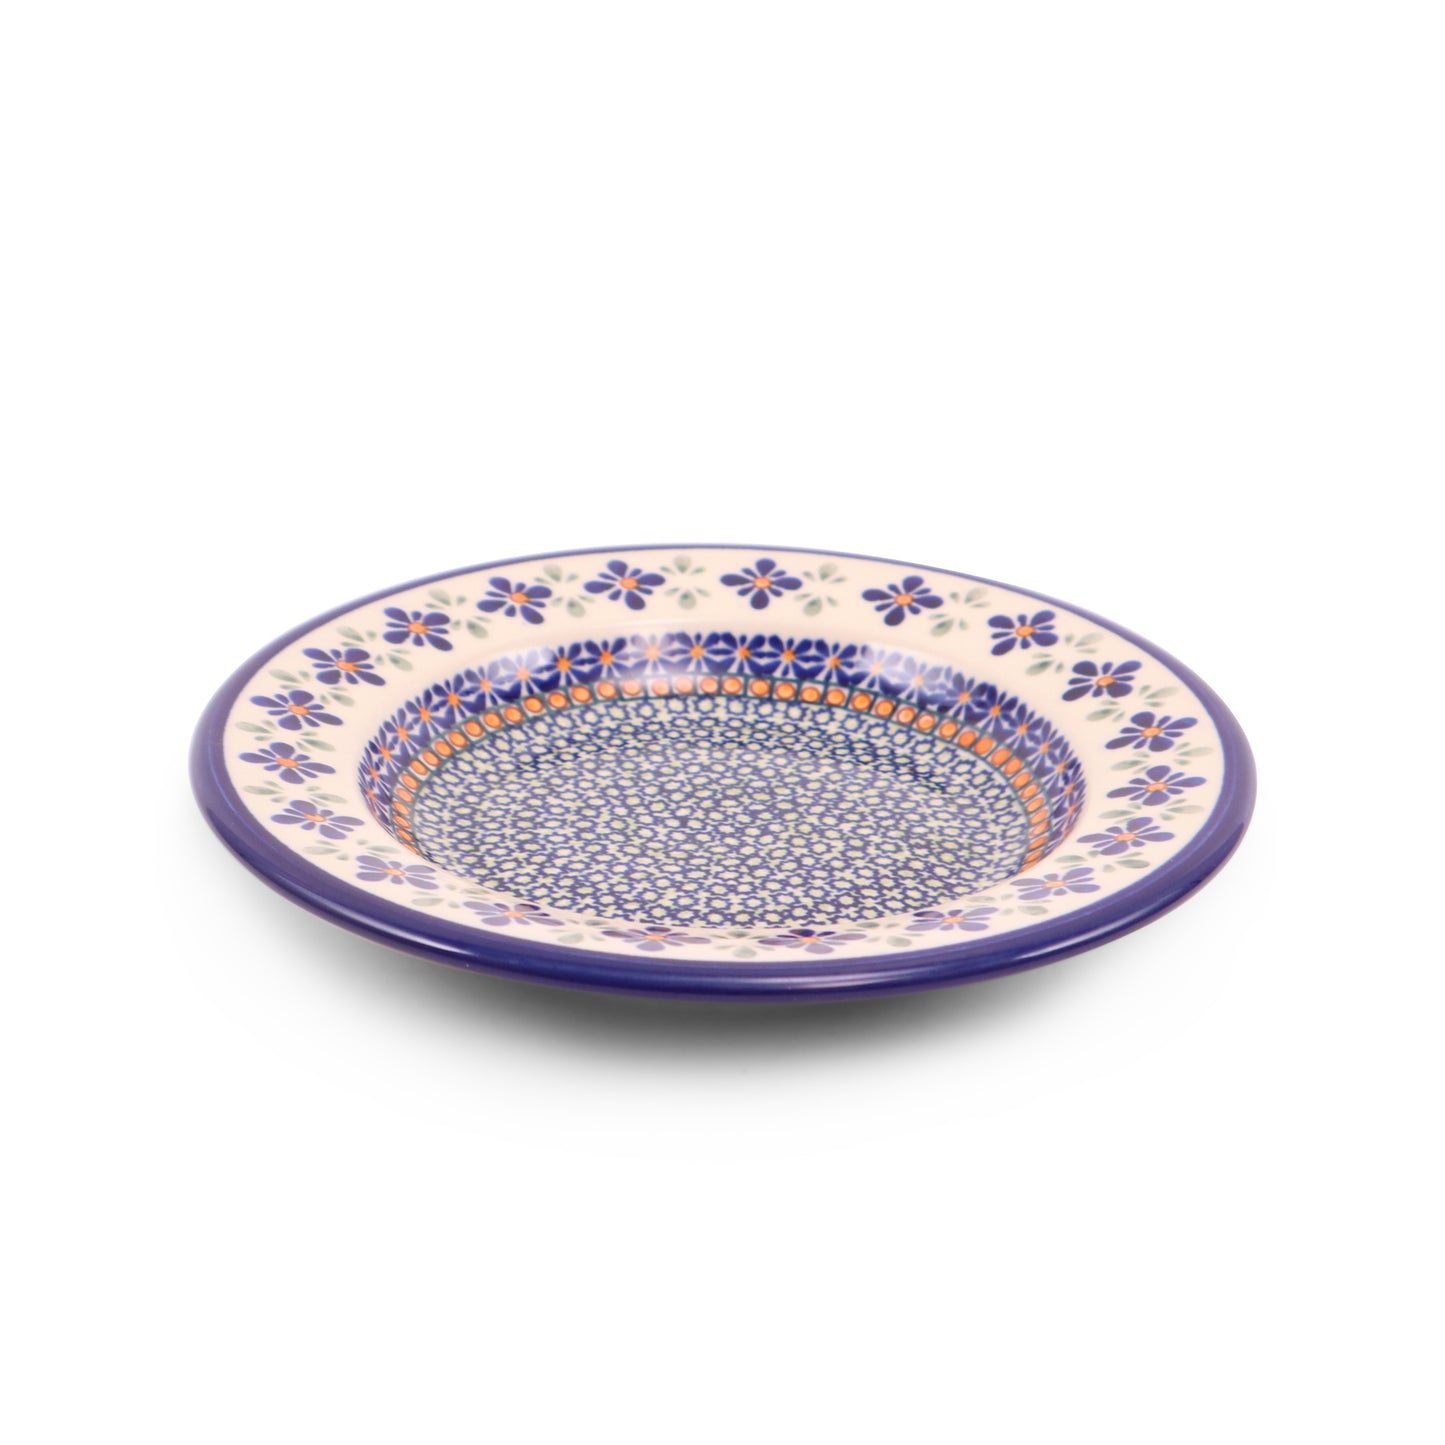 9.5" Soup Plate. Pattern: Andover